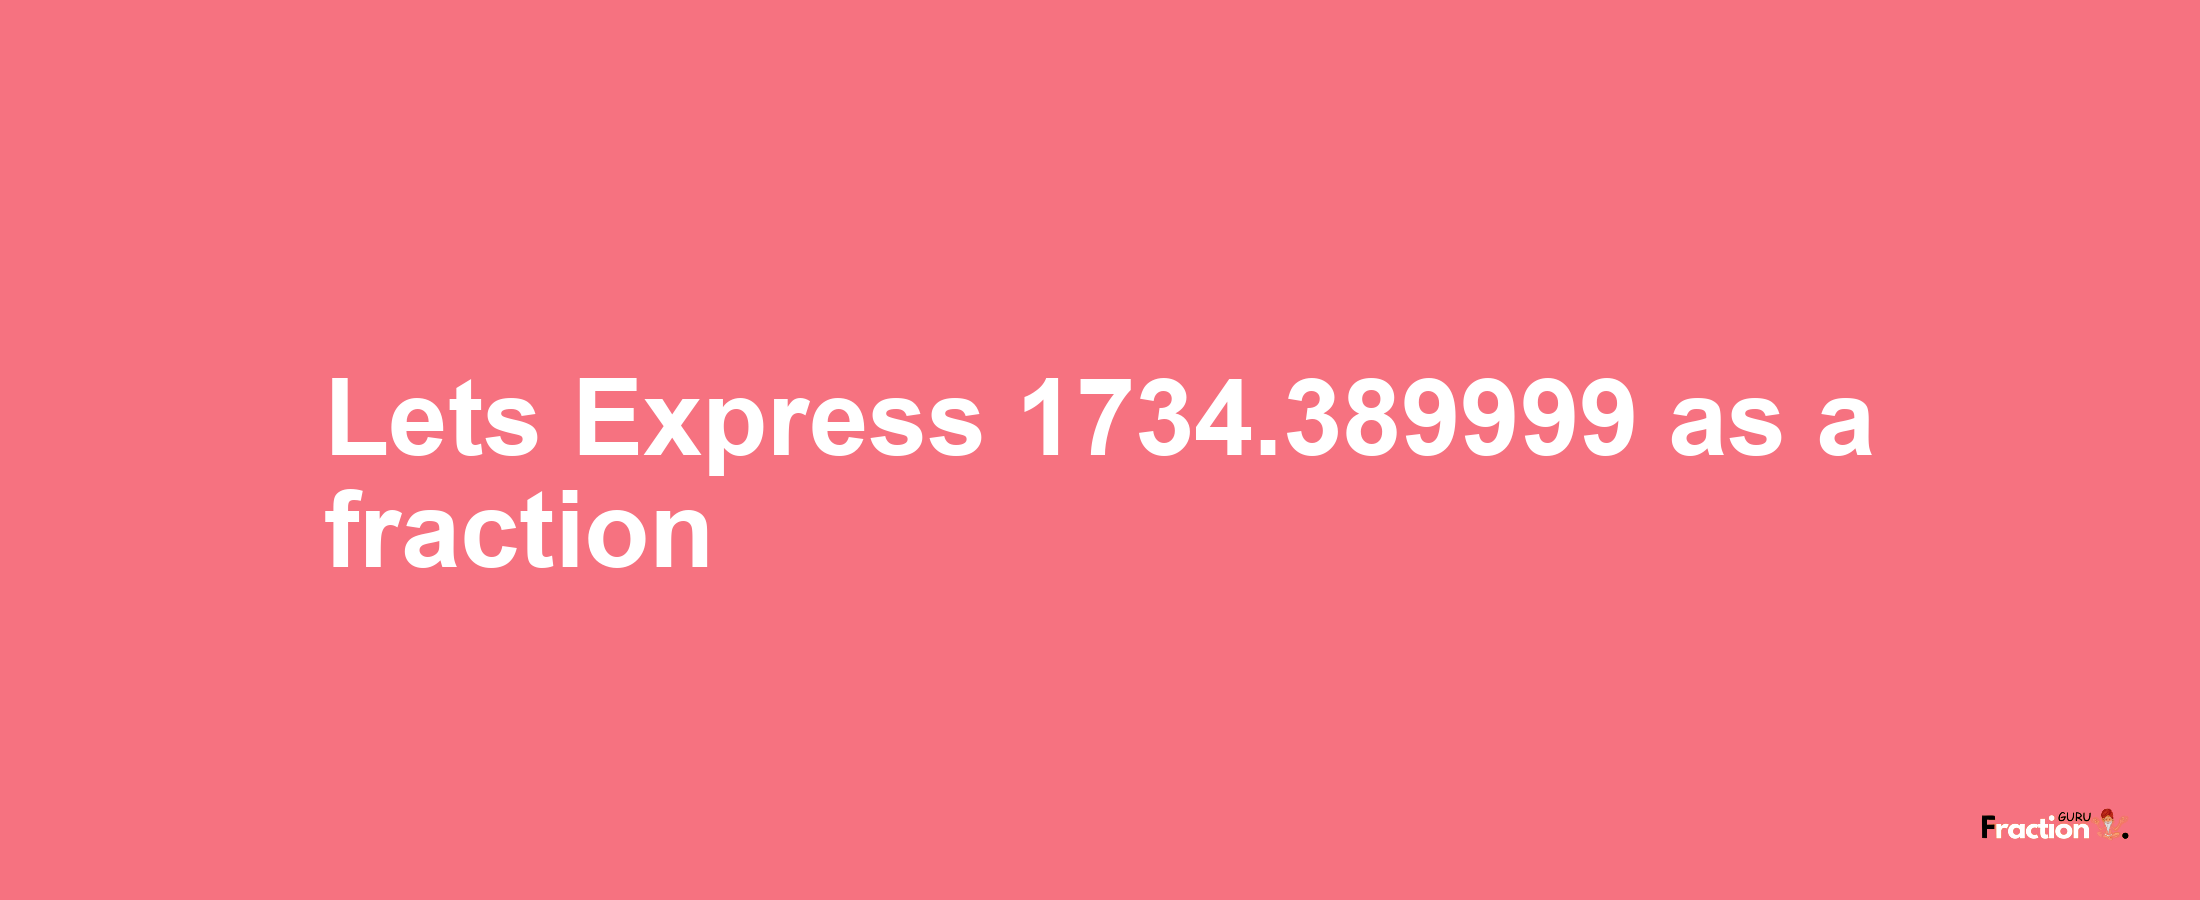 Lets Express 1734.389999 as afraction